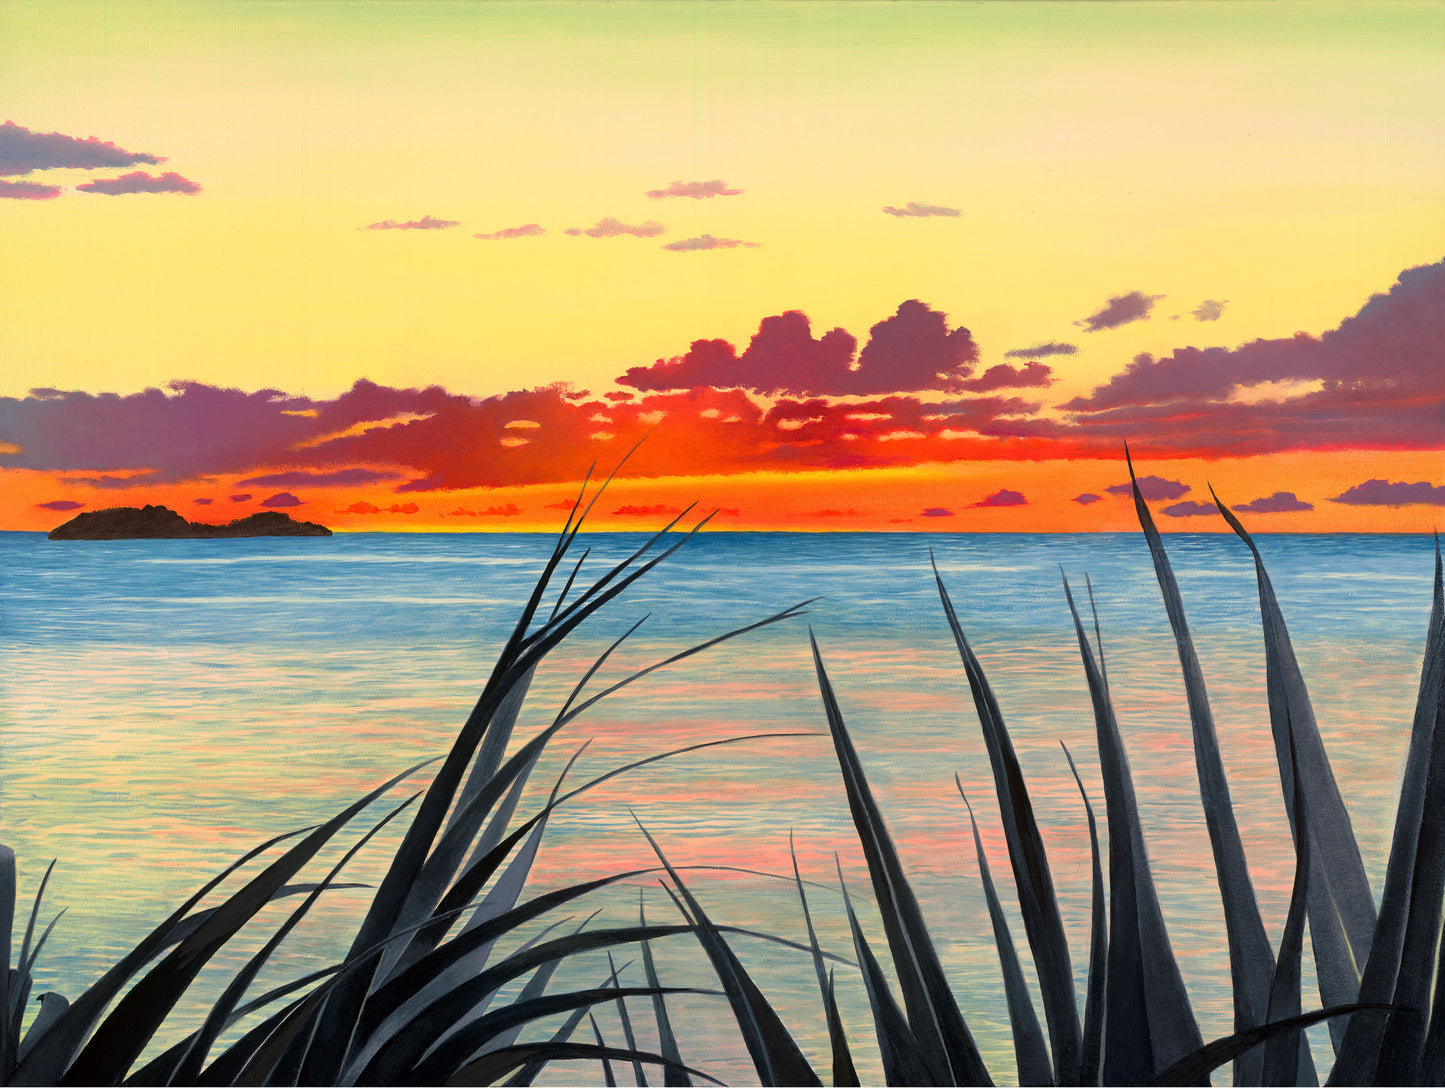 Commission 2021 Oil Painting - Sunset Over the Bay